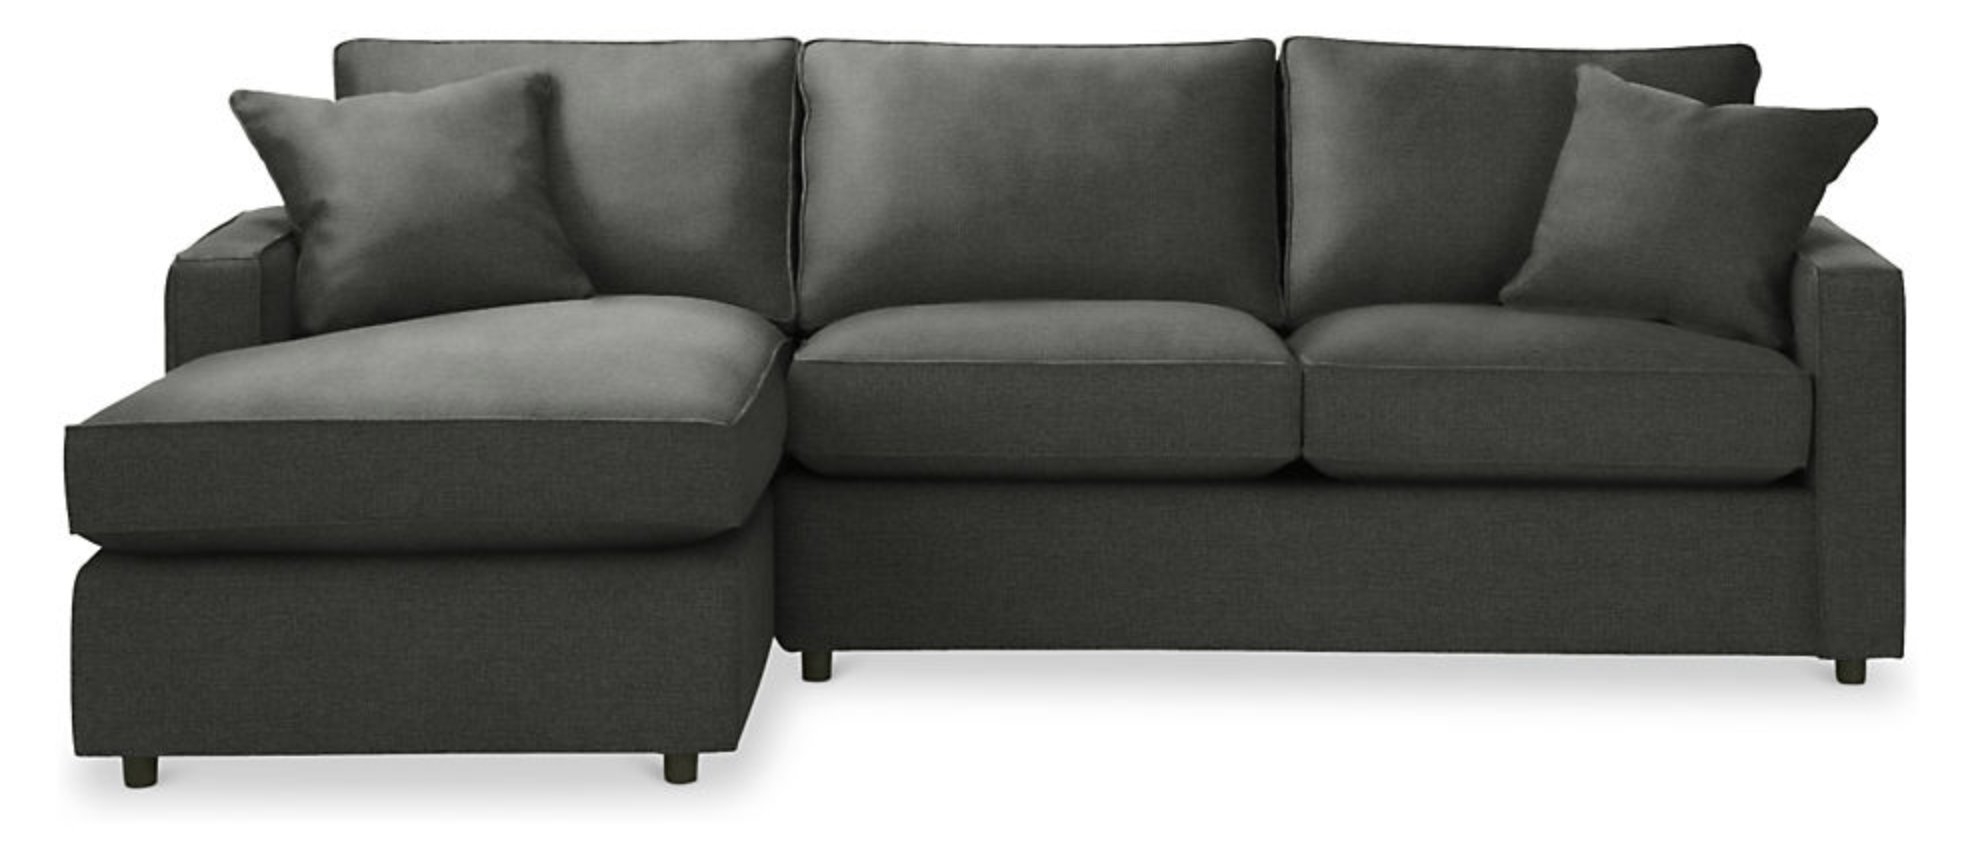 York 95" Sofa with Left-Arm Chaise in Sumner Charcoal Fabric - Image 0